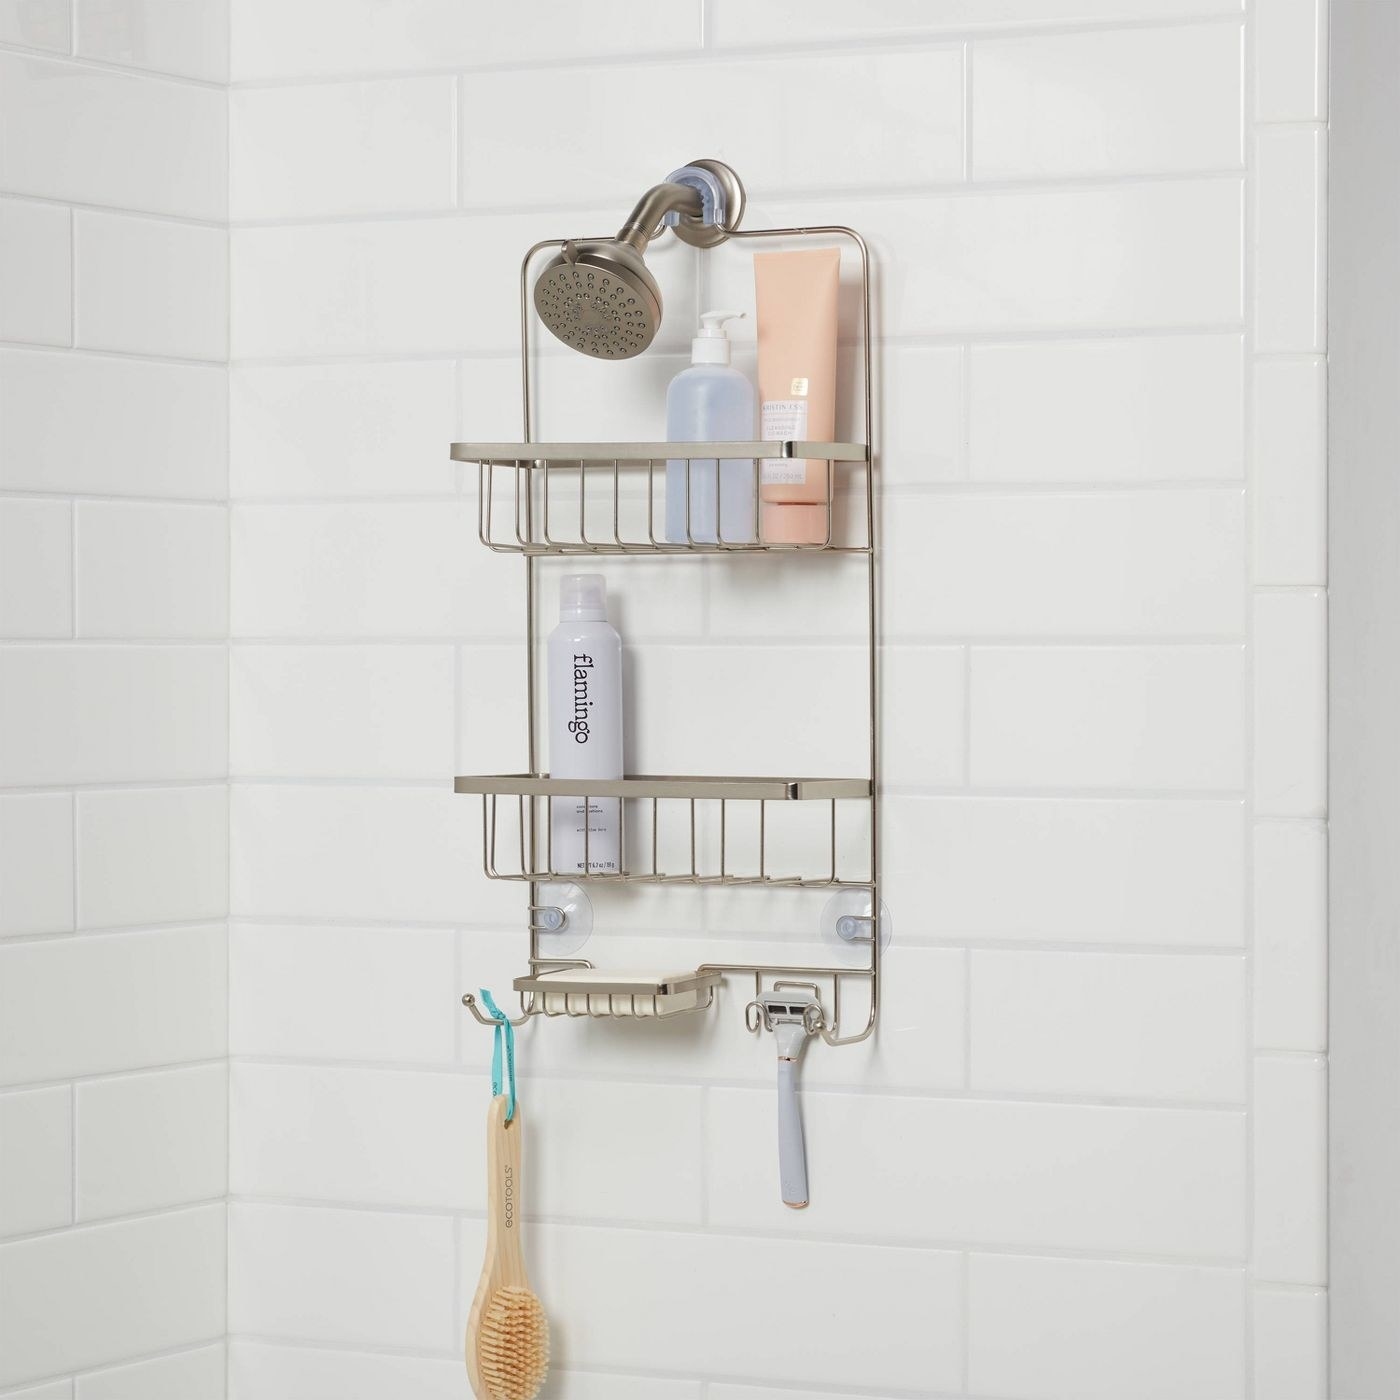 The shower caddy hanging over the showerhead.